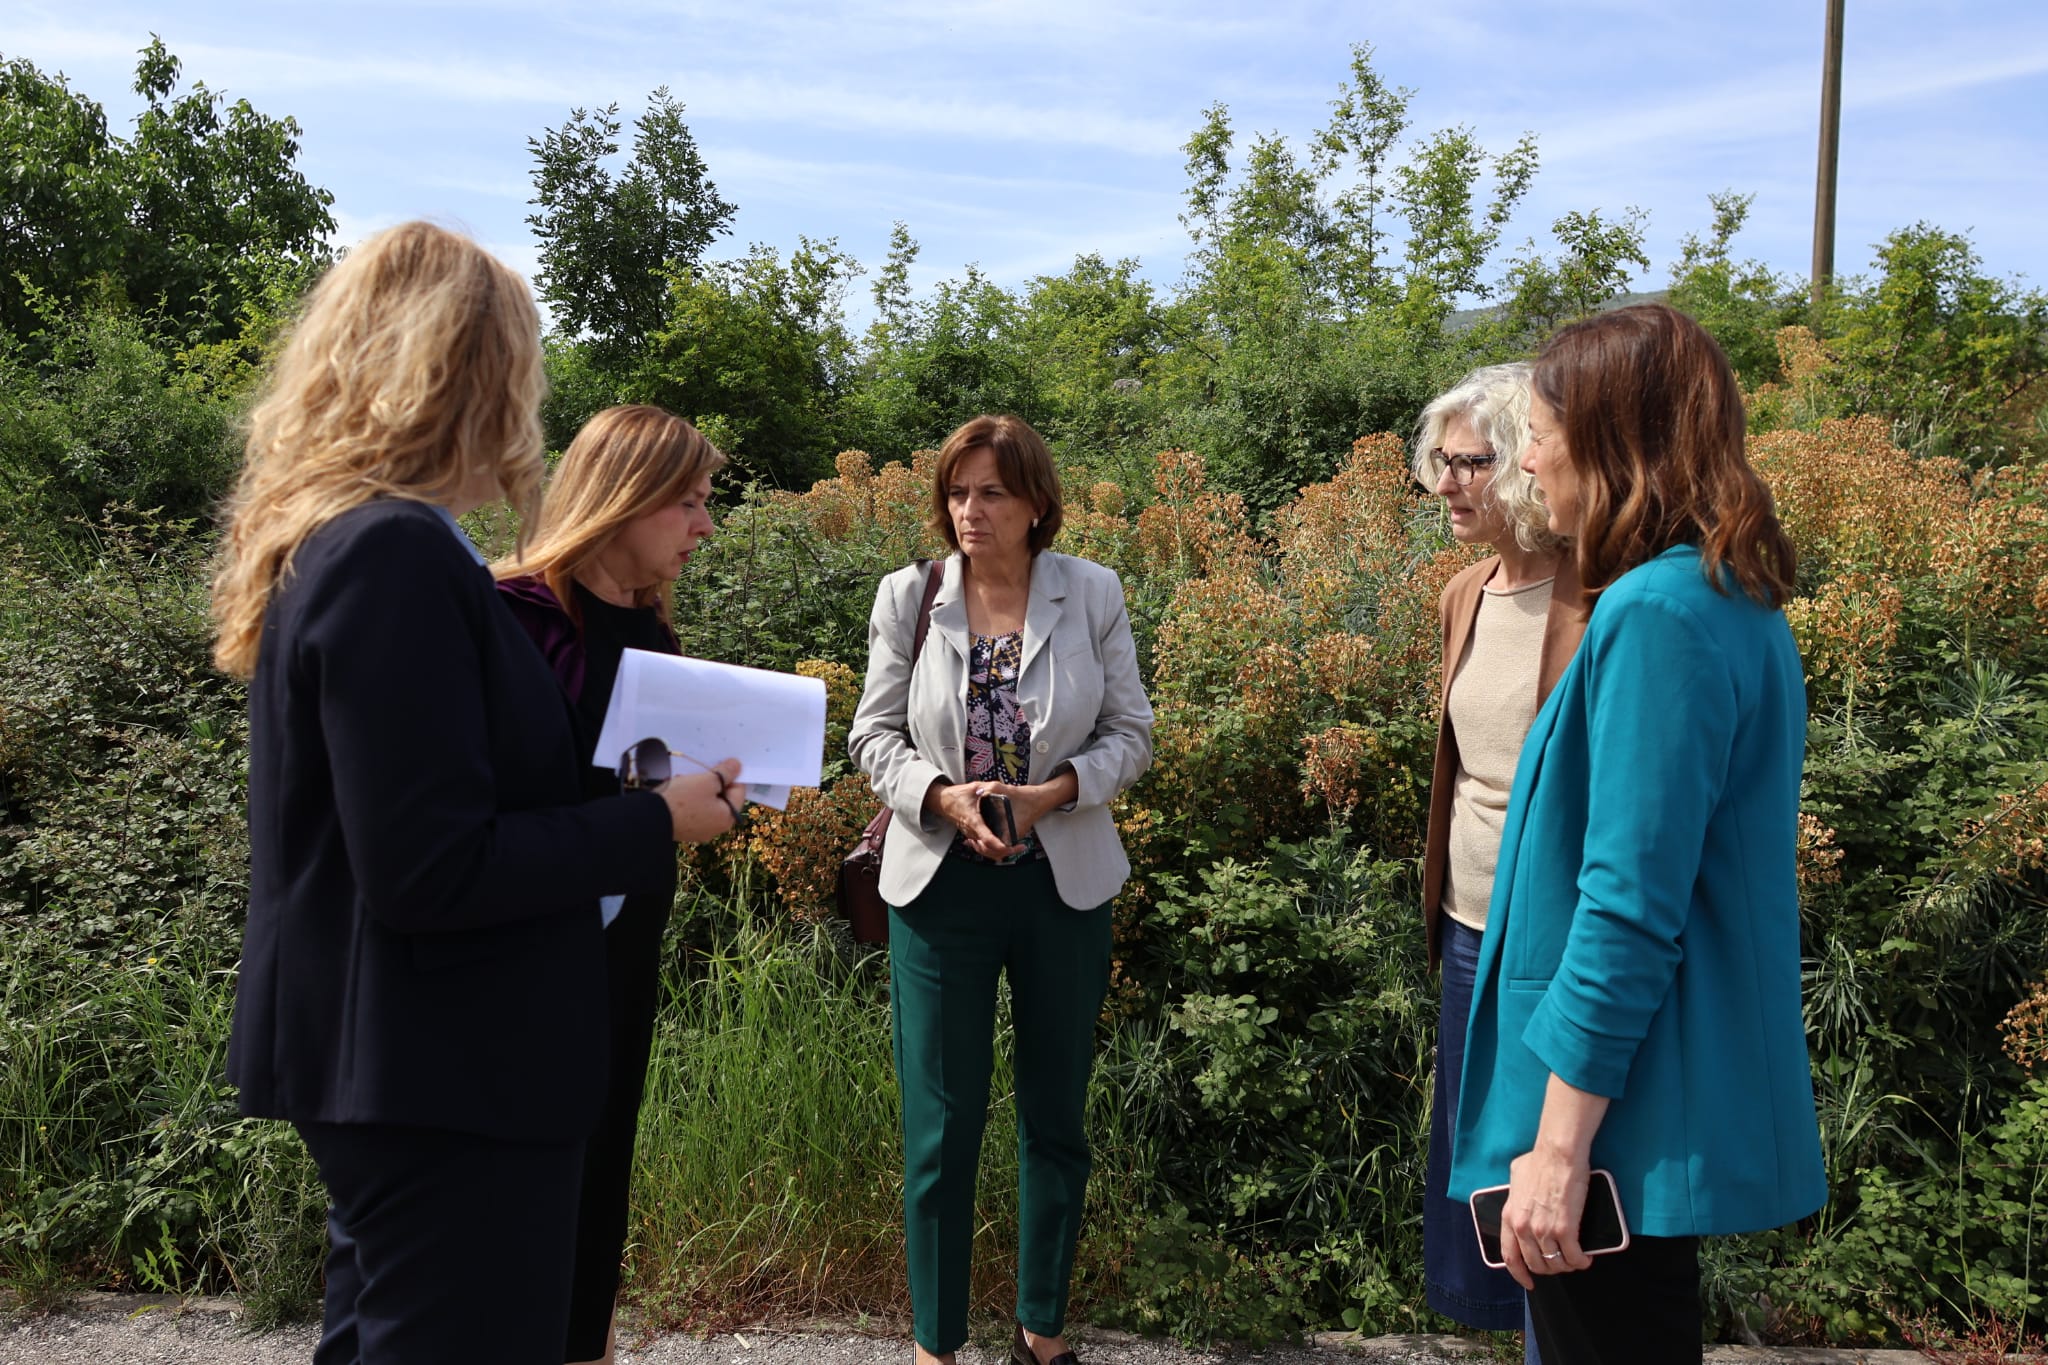 The safe house in Rebinje, Bosnia and Herzegovina aims to build a sustainable solution for the protection and empowerment of women survivors of violence. Photo: UN Women